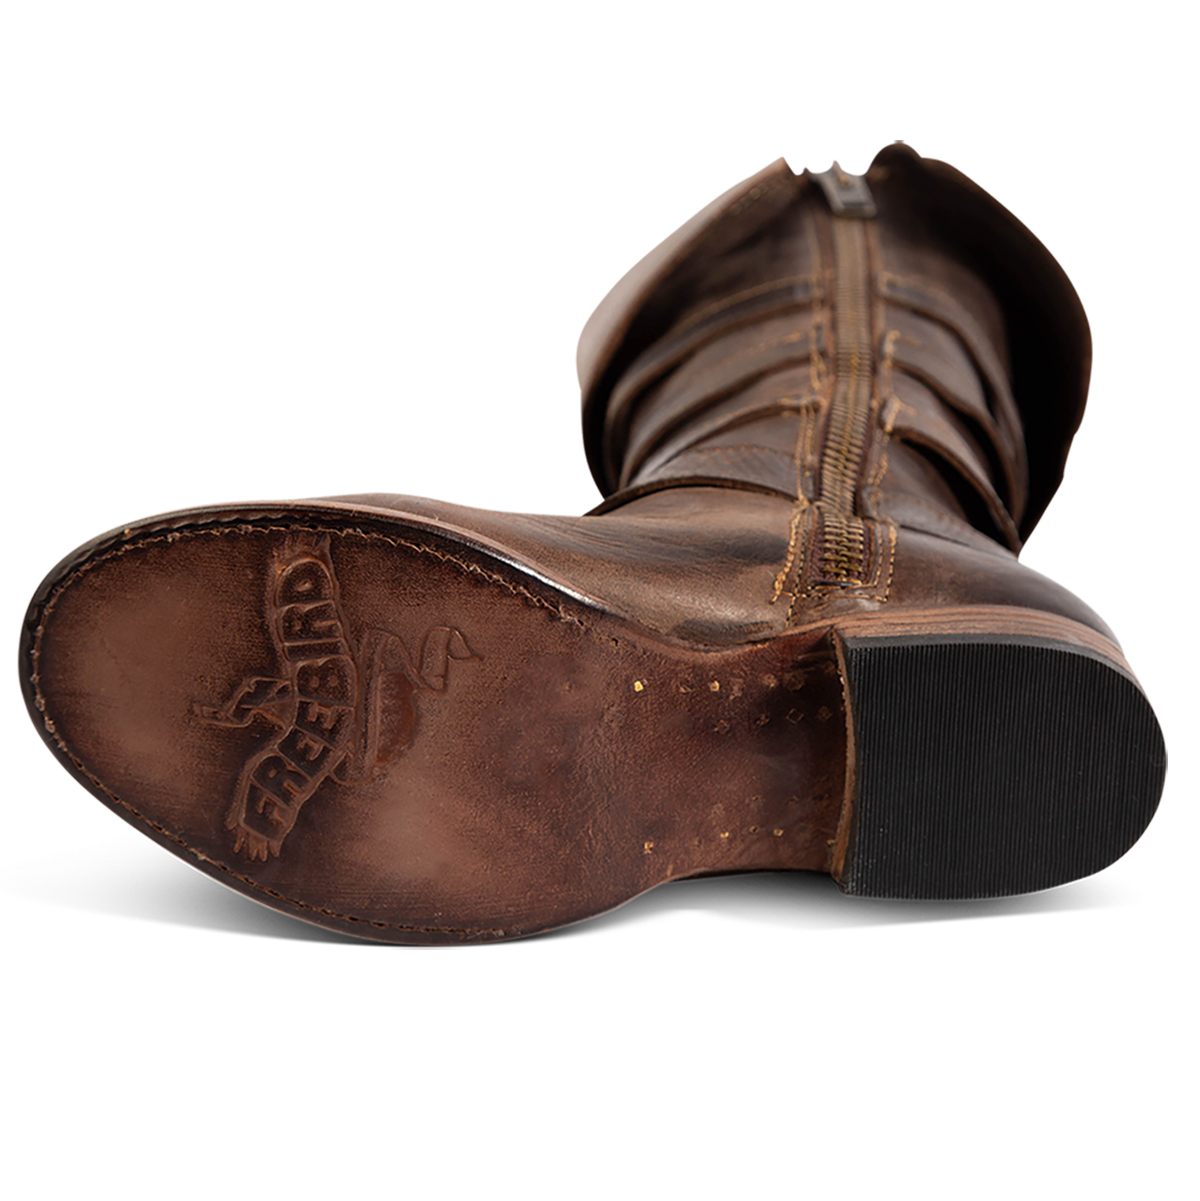 Leather sole imprinted with FREEBIRD on women's Risky brown fold-over tall boot